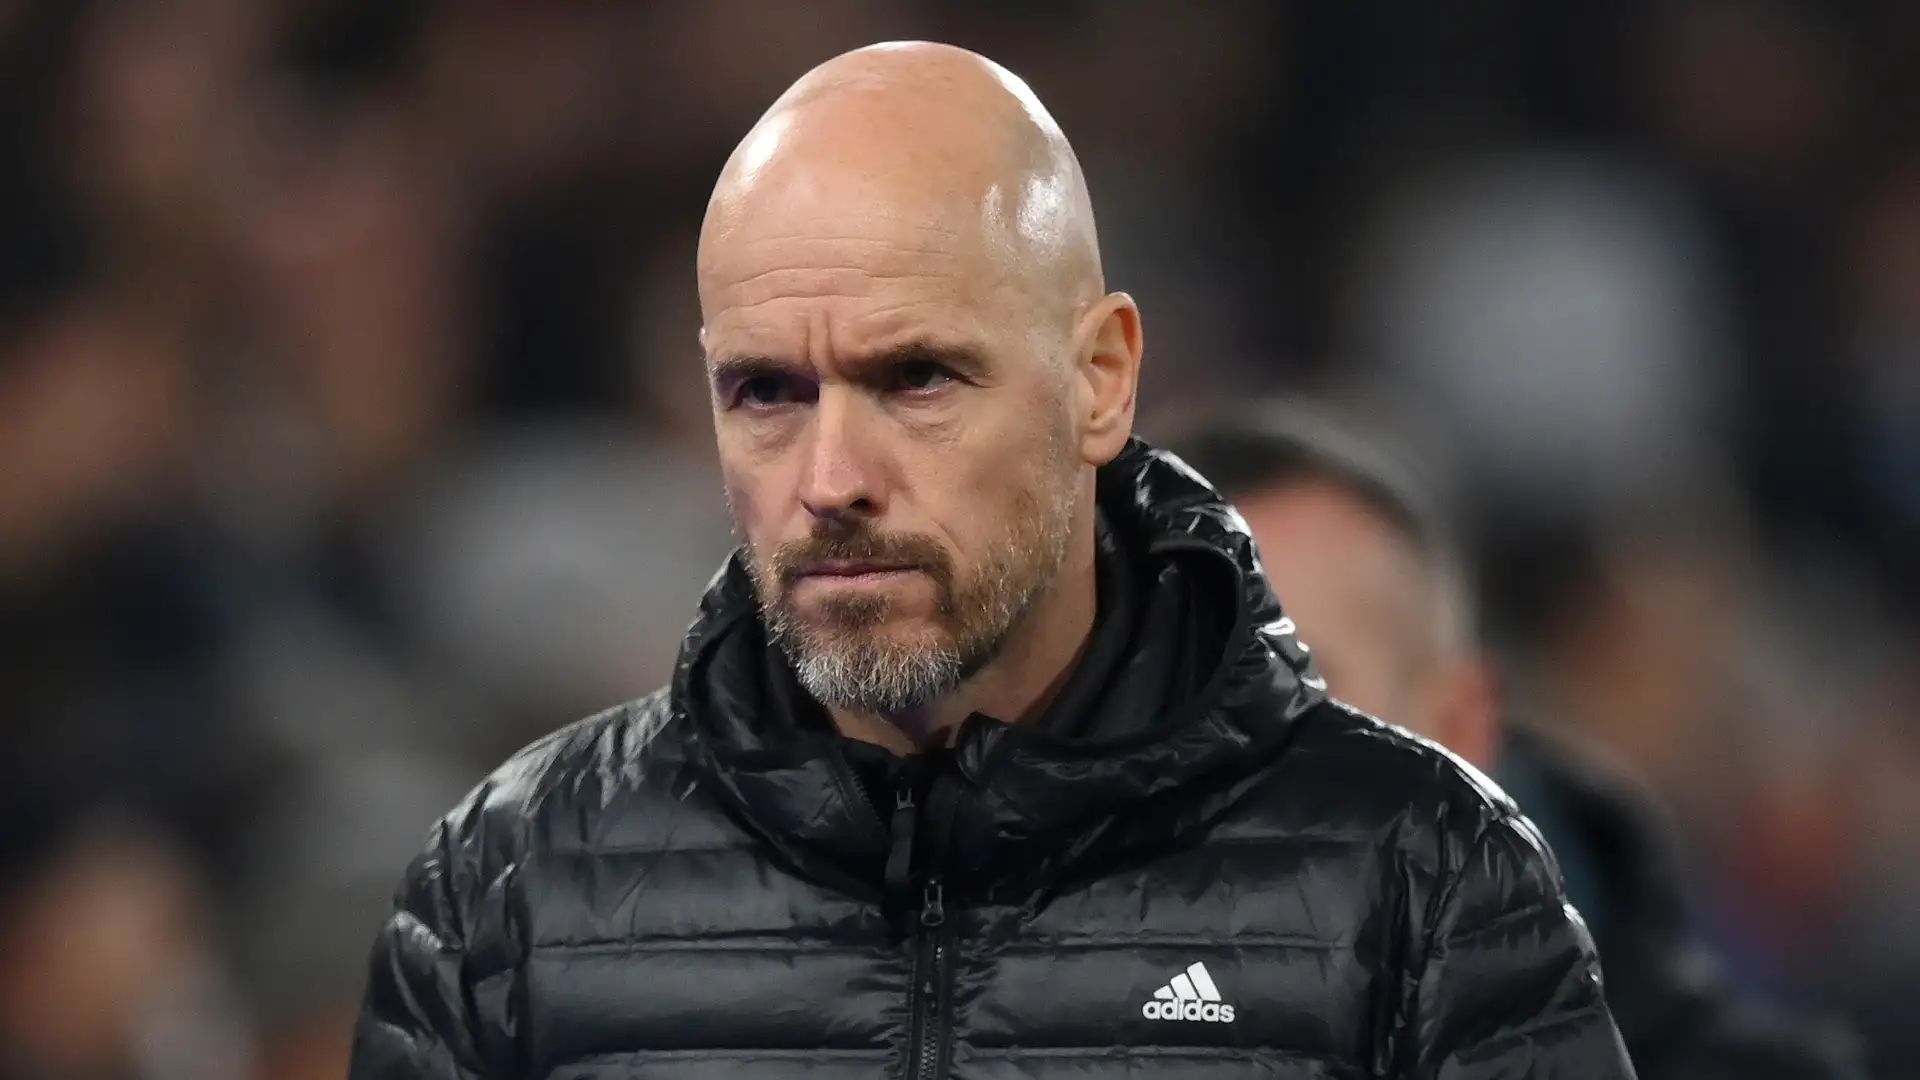 Man Utd boss Erik ten Hag slams critics who ‘don’t have any knowledge of football’ as Dutchman launches impassioned defence of managerial record